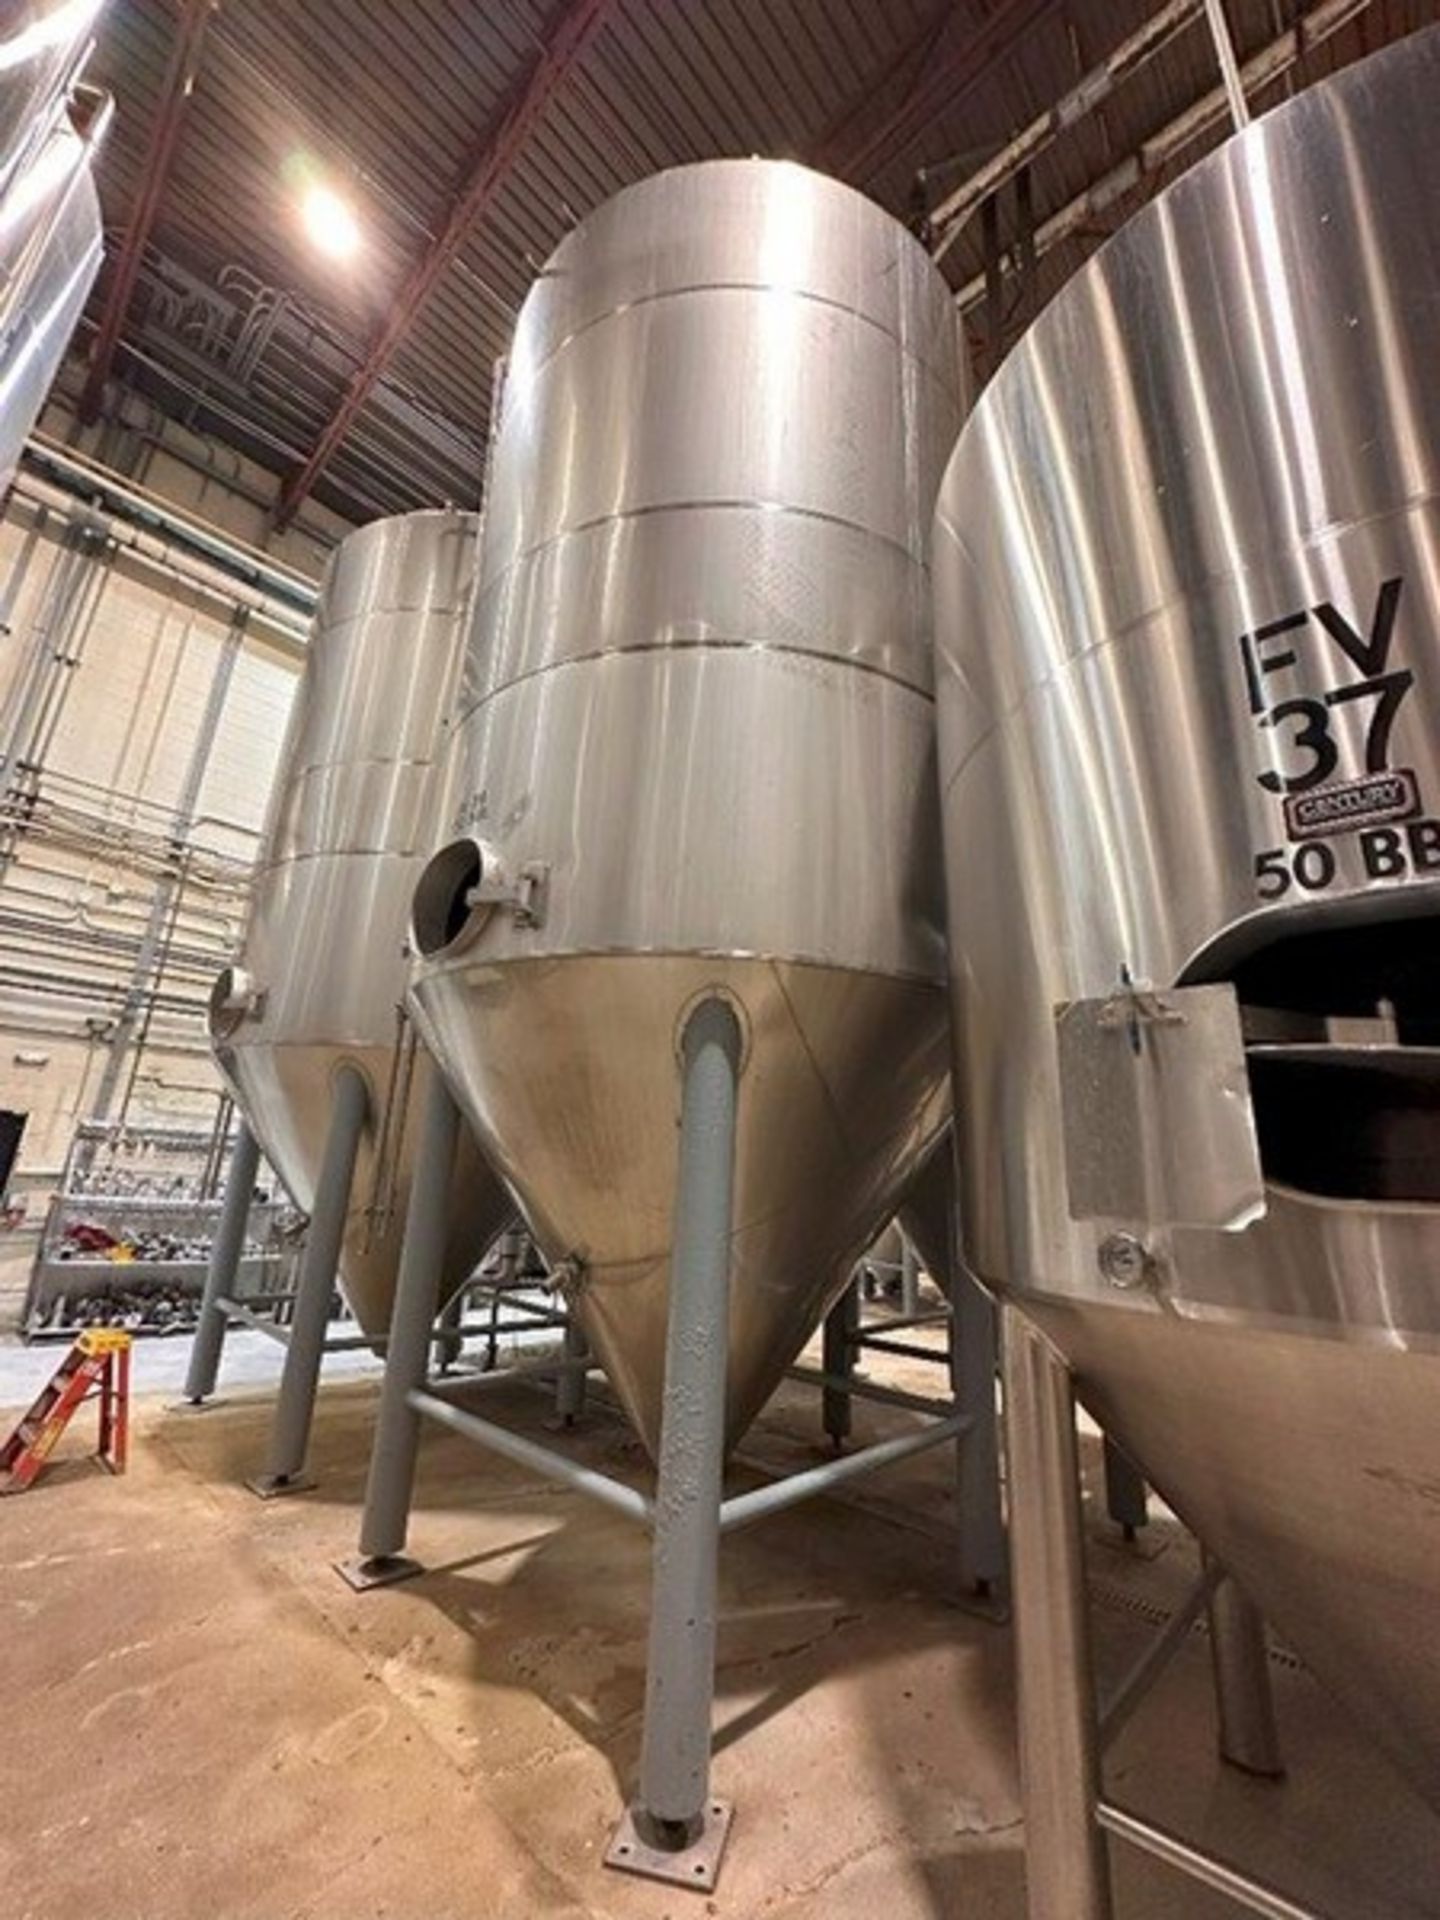 150 BBL (4650 Gallon) Vertical Cone Bottom 304 Stainless Steel Jacketed Vessel. Manufactured by Sant - Bild 3 aus 8